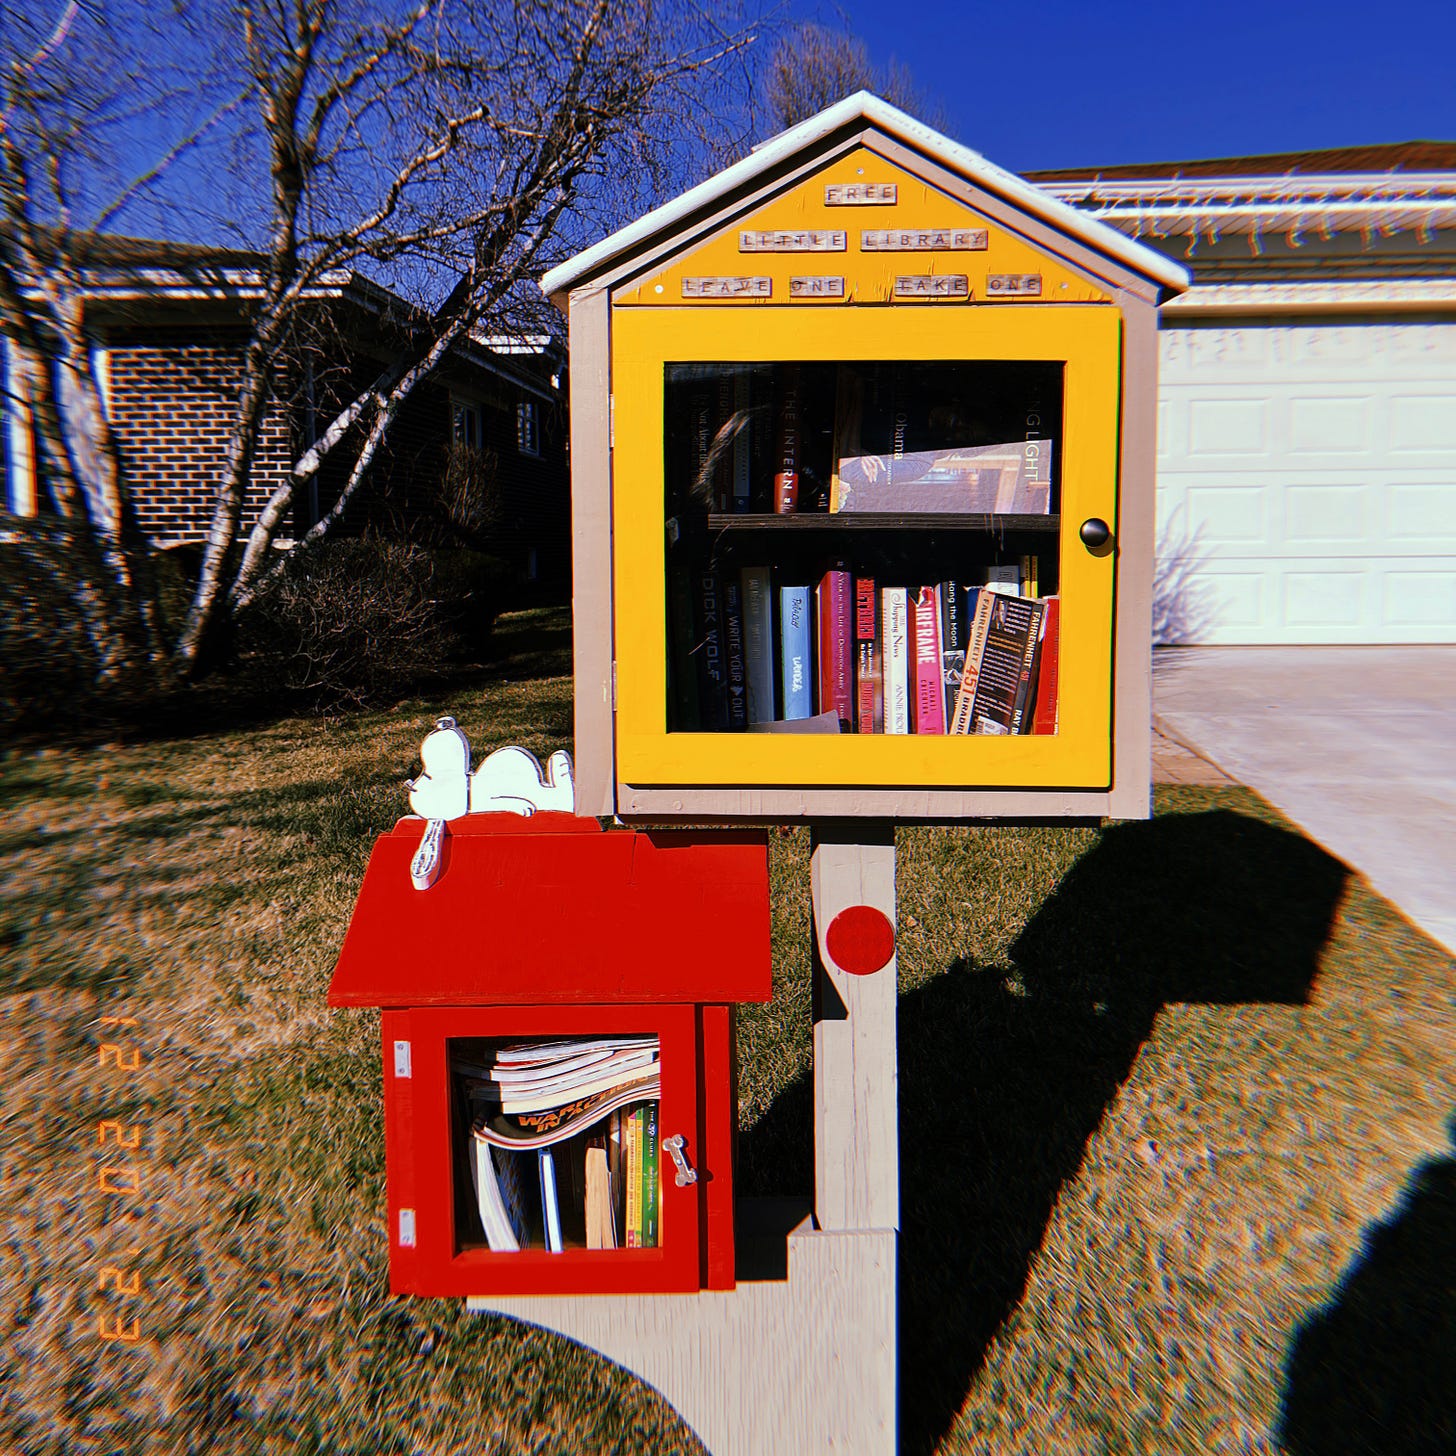 A photo of a little free library. It has two levels, one yellow and one red, with Snoopy lounging on the red one.